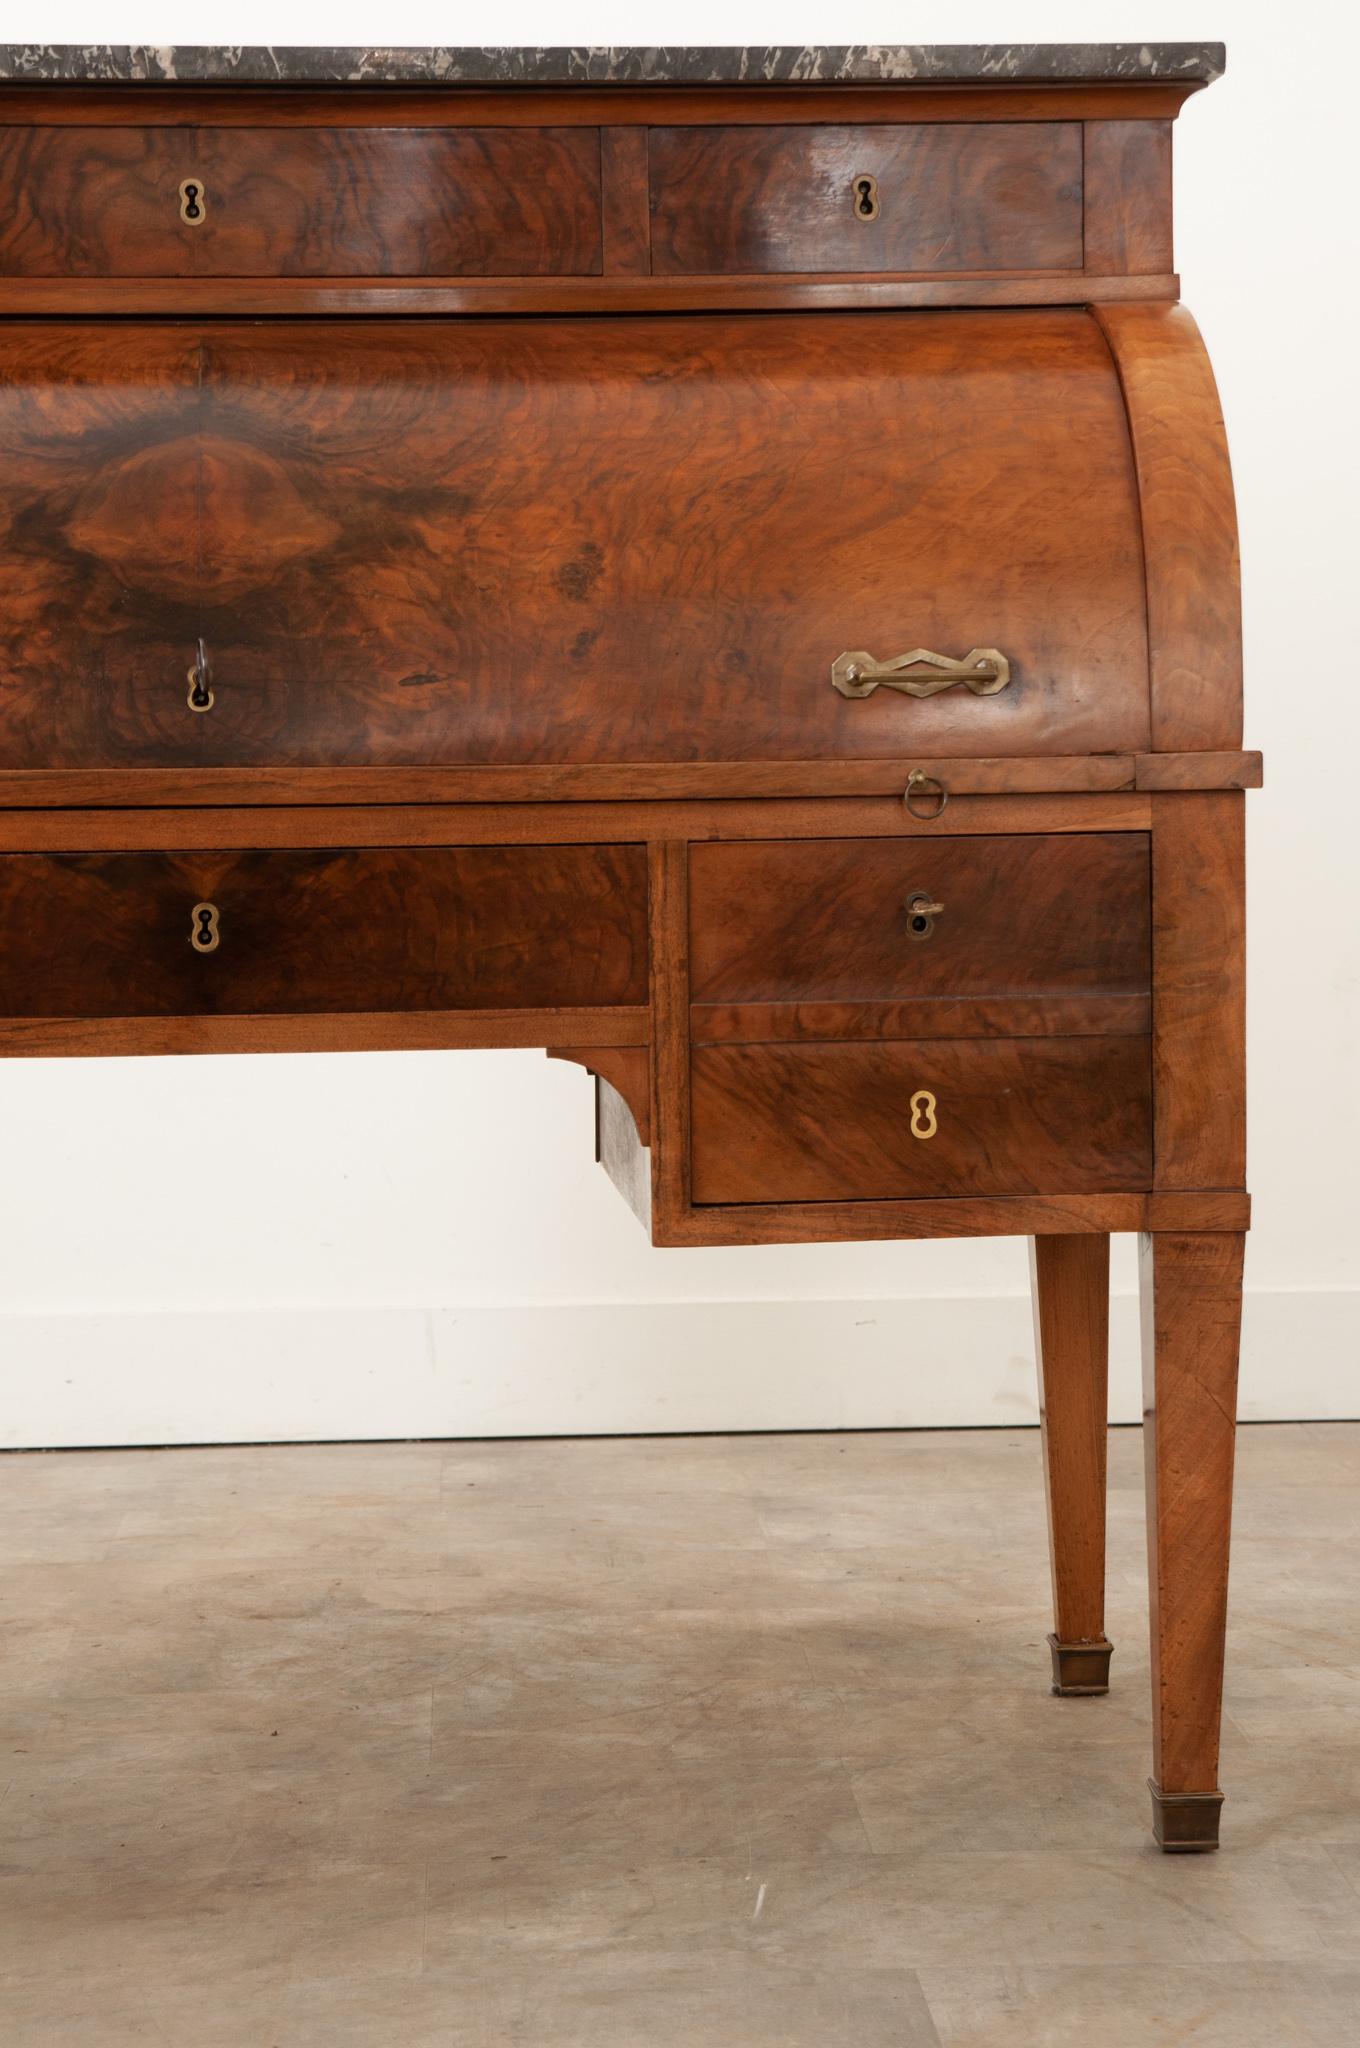 French 18th Century Directoire Roll Top Desk In Good Condition For Sale In Baton Rouge, LA